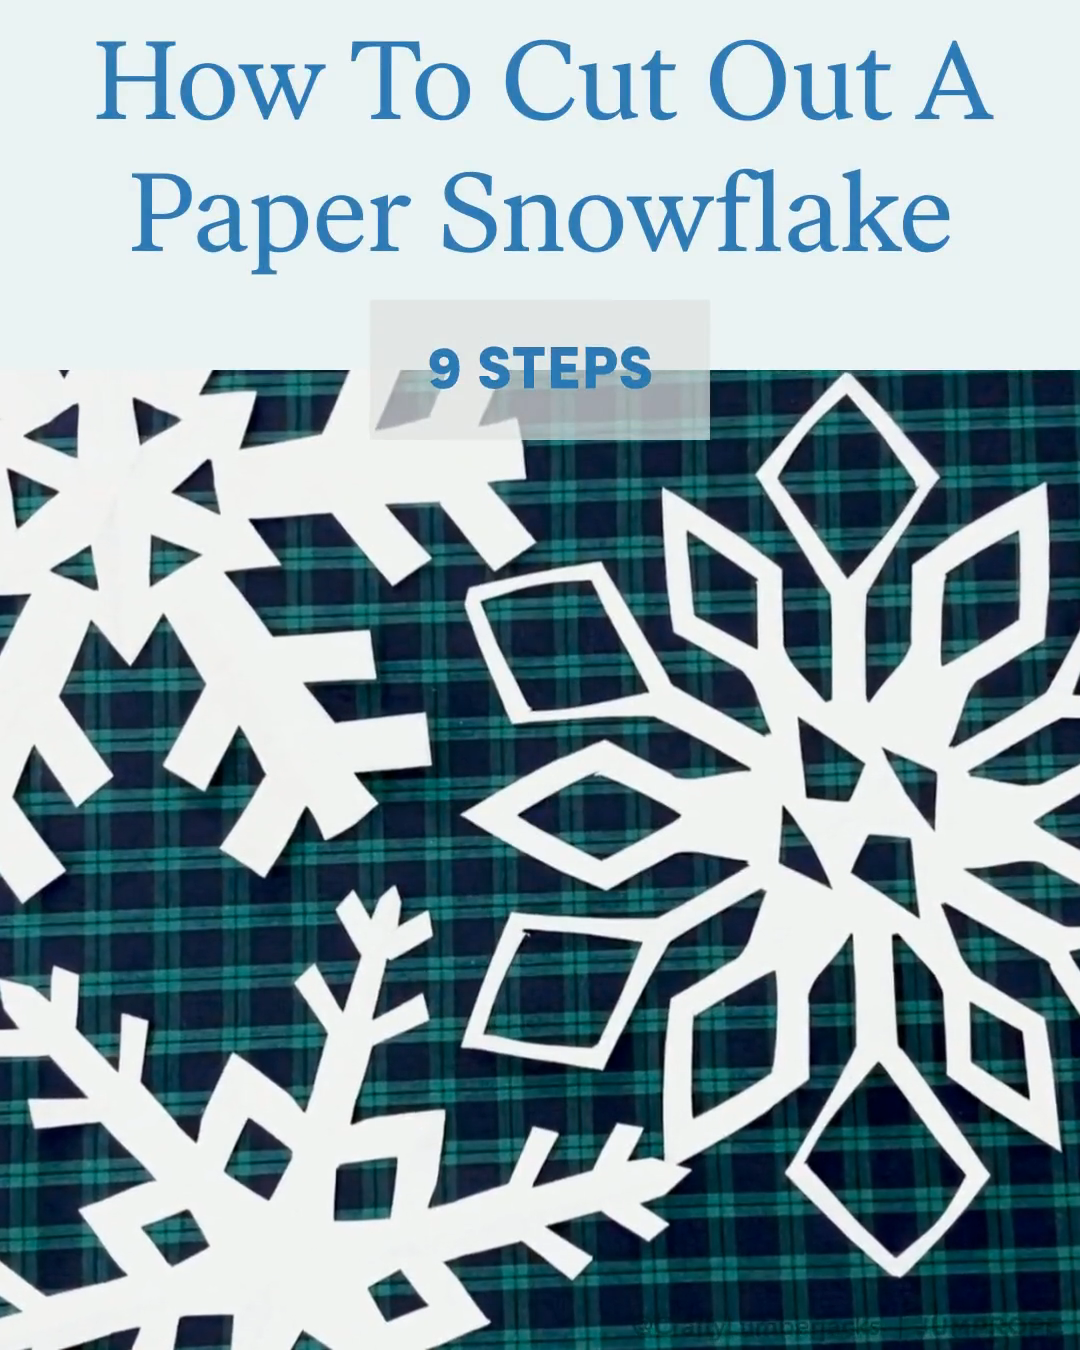 How To Cut Out A Paper Snowflake - How To Cut Out A Paper Snowflake -   18 diy Christmas snowflakes ideas